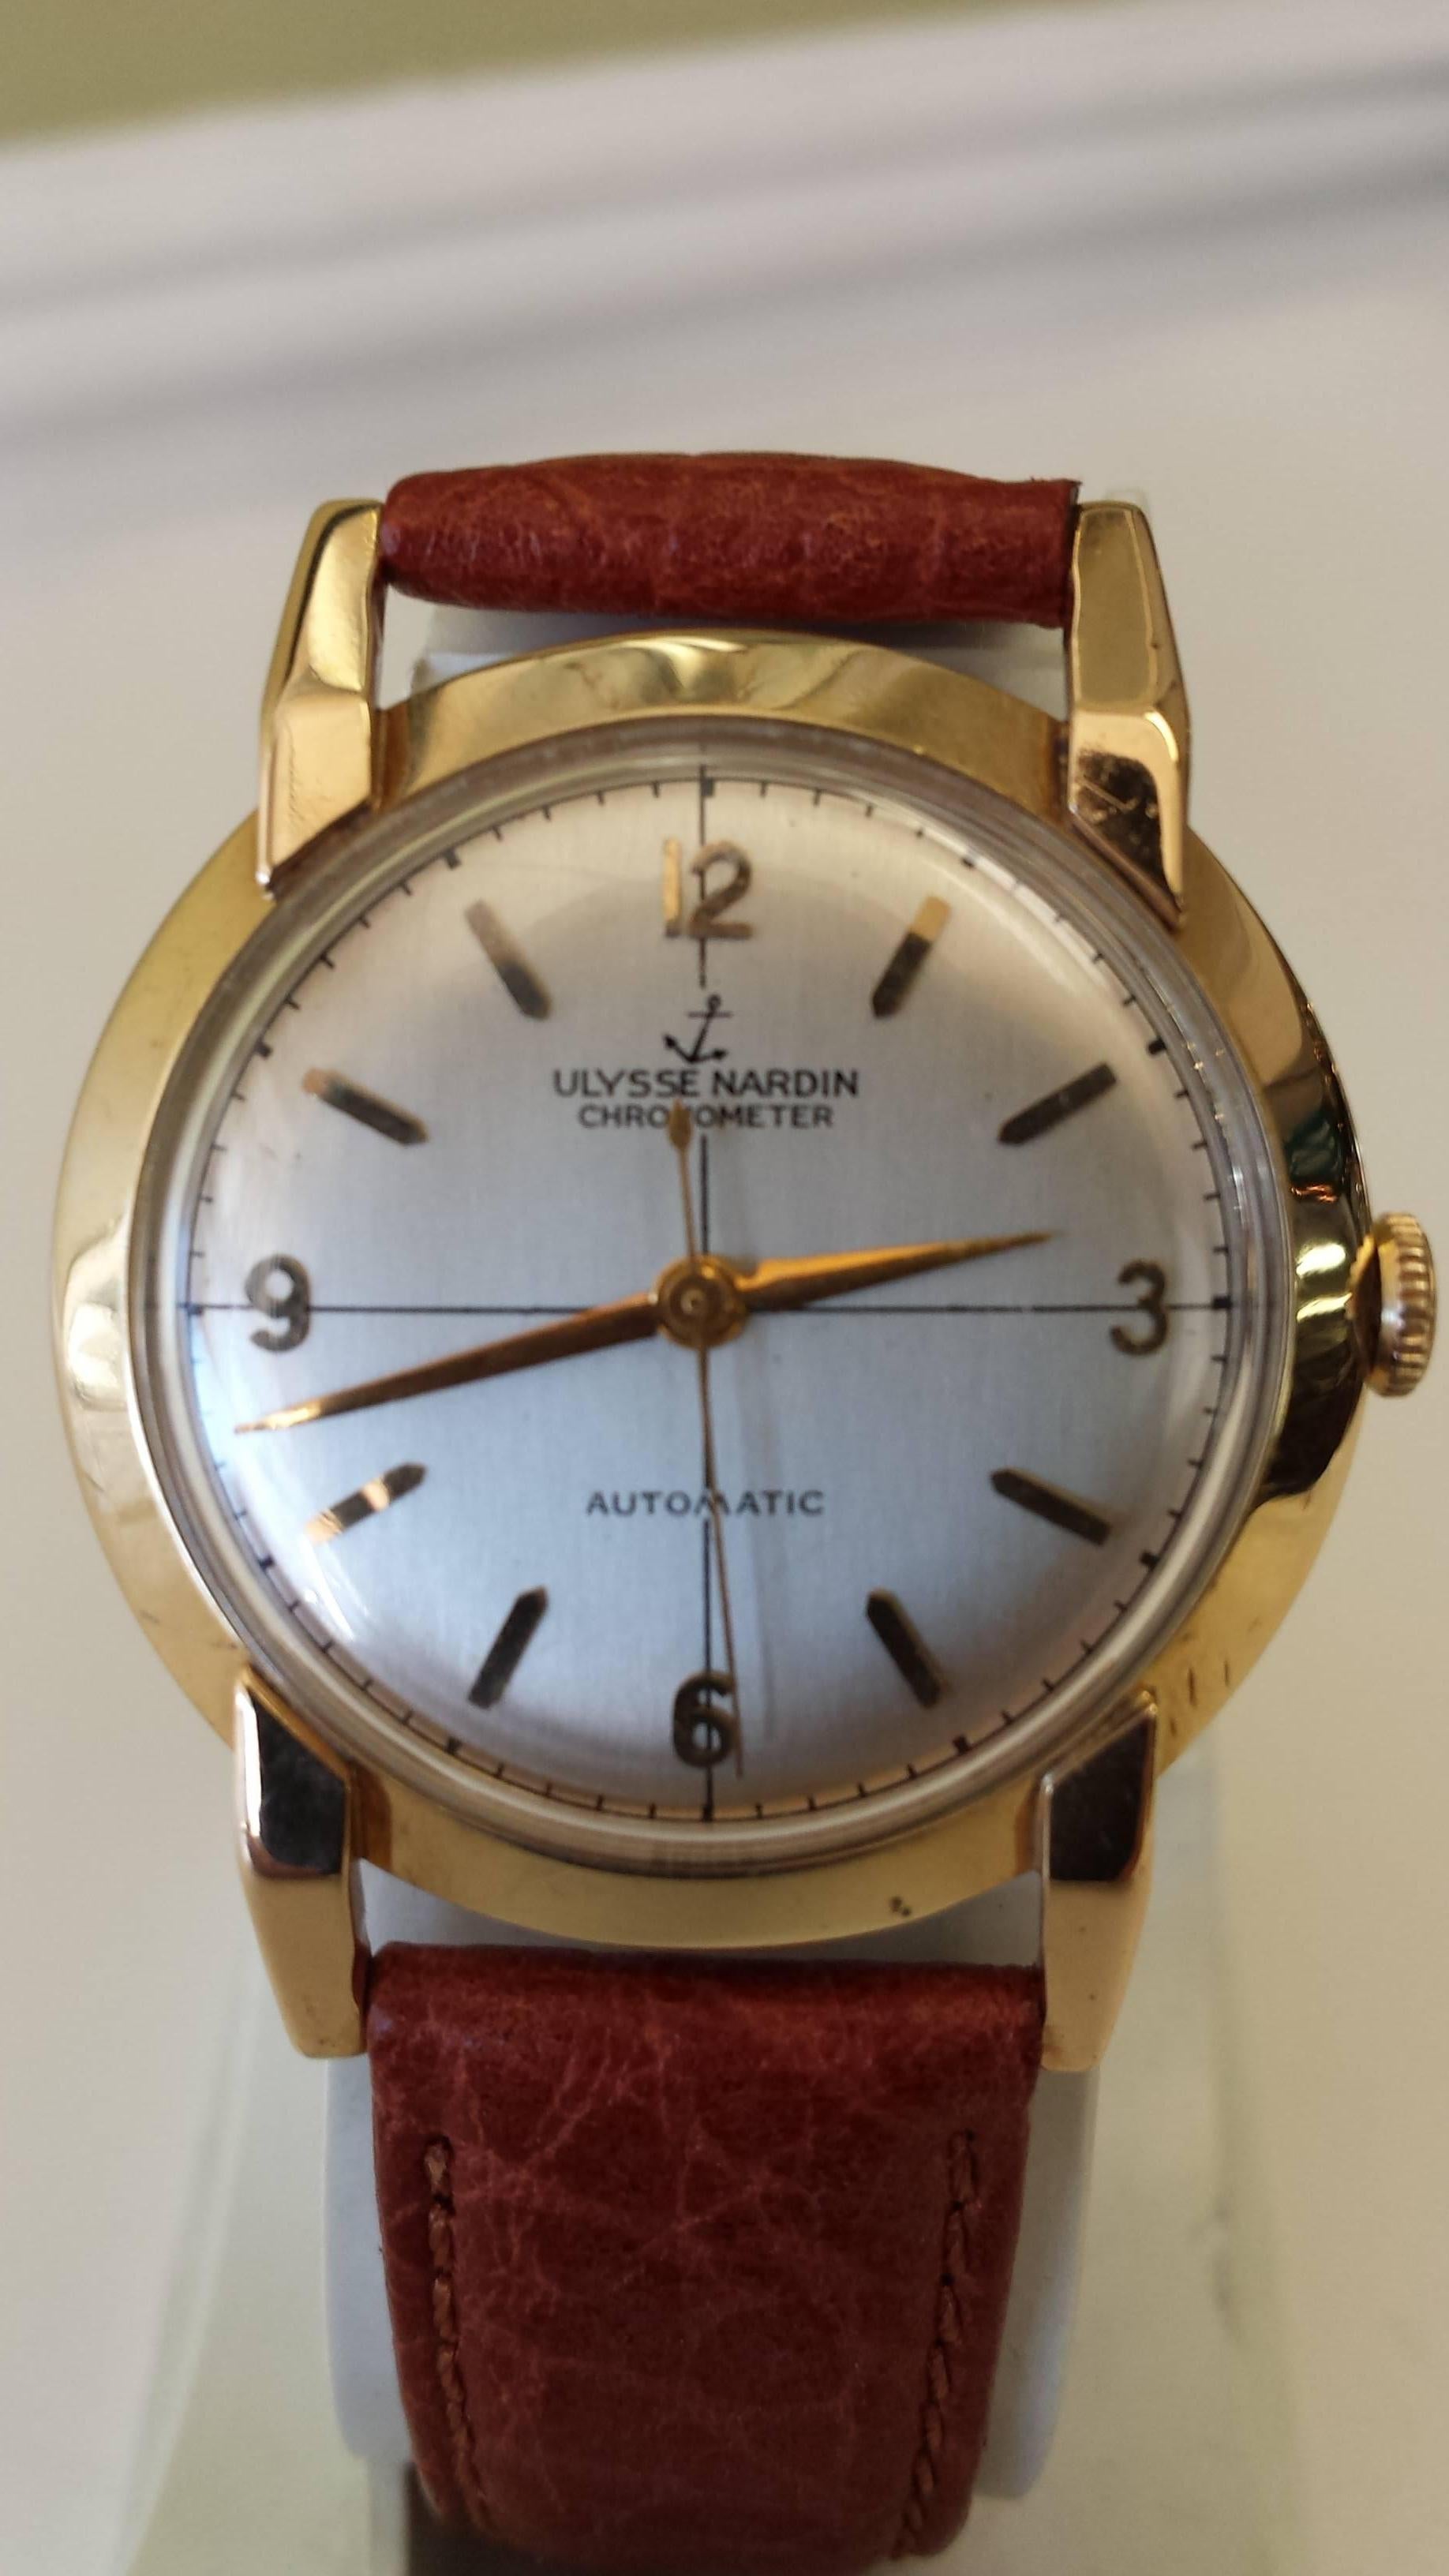 Ulysse Nardin chronometer automatic men's wristwatch in 14K Gold, New replacement leather bracelet, The watch is in good working order and keeps perfect time. Minor marks from wearing the watch, but nothing significant. The watch is 35 mm in